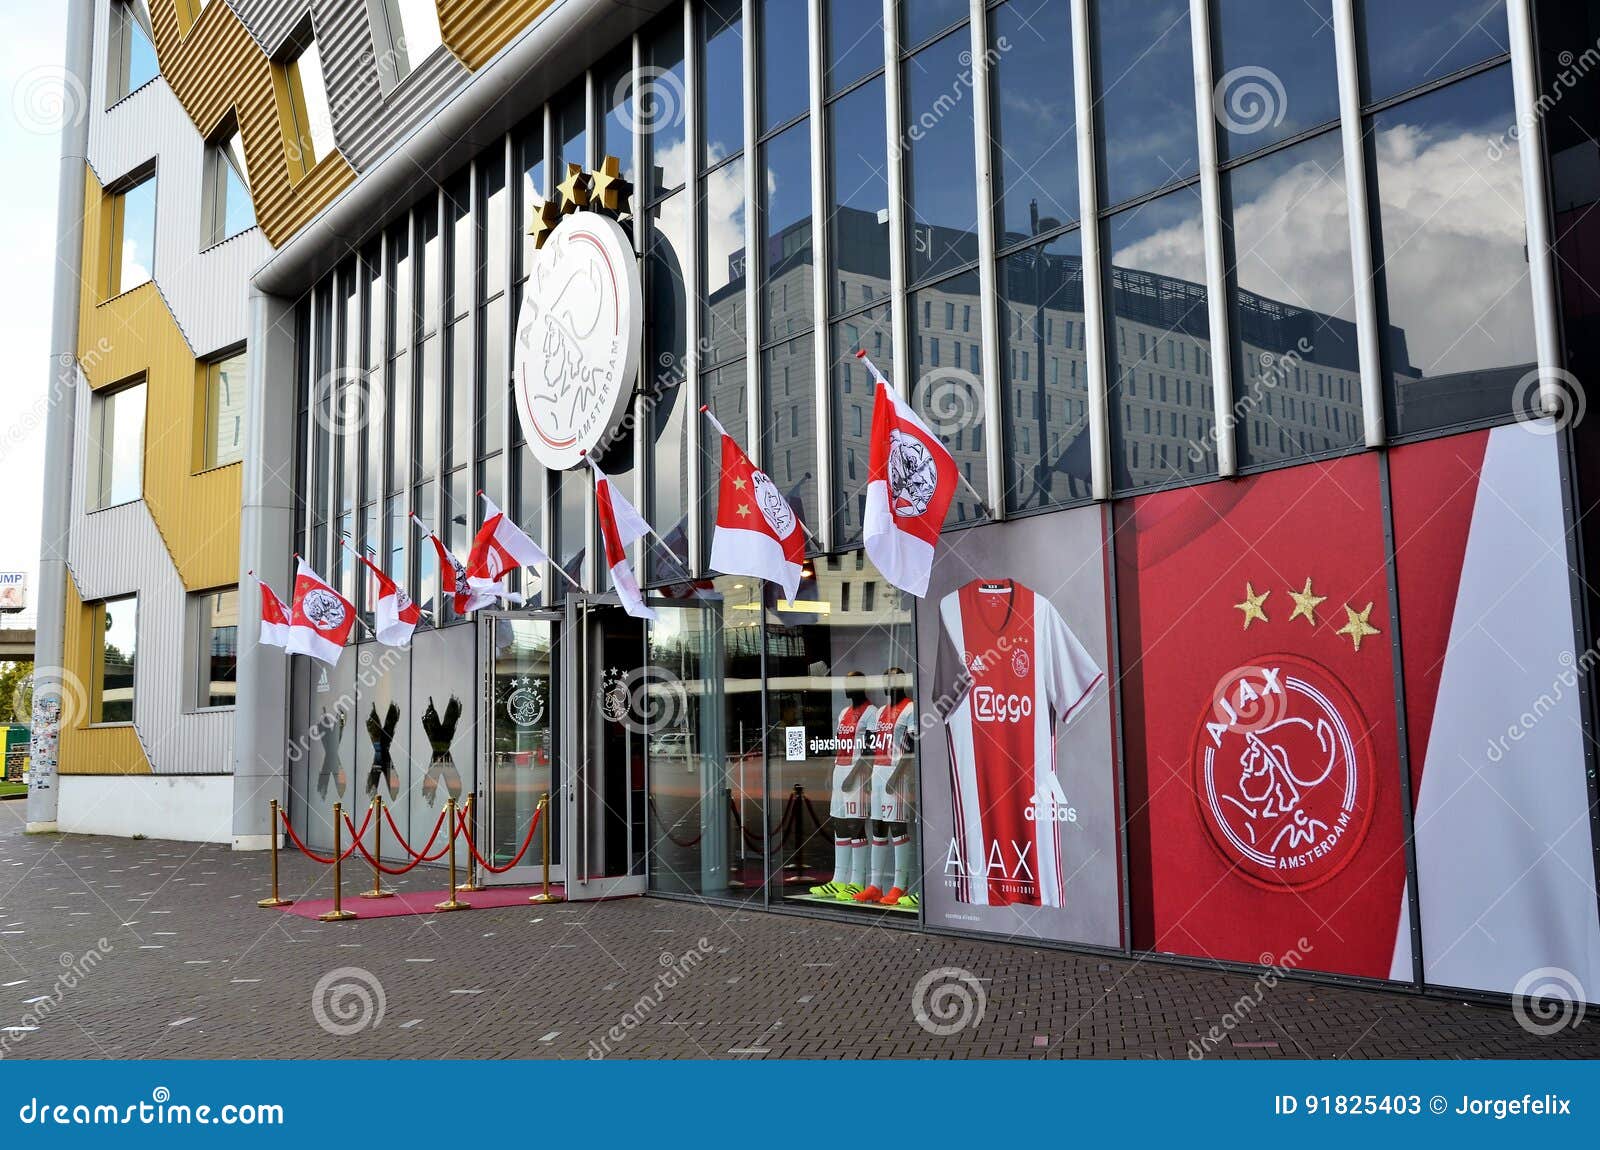 The the Soccer Club Ajax Editorial Stock Photo - Image of touristic, 91825403